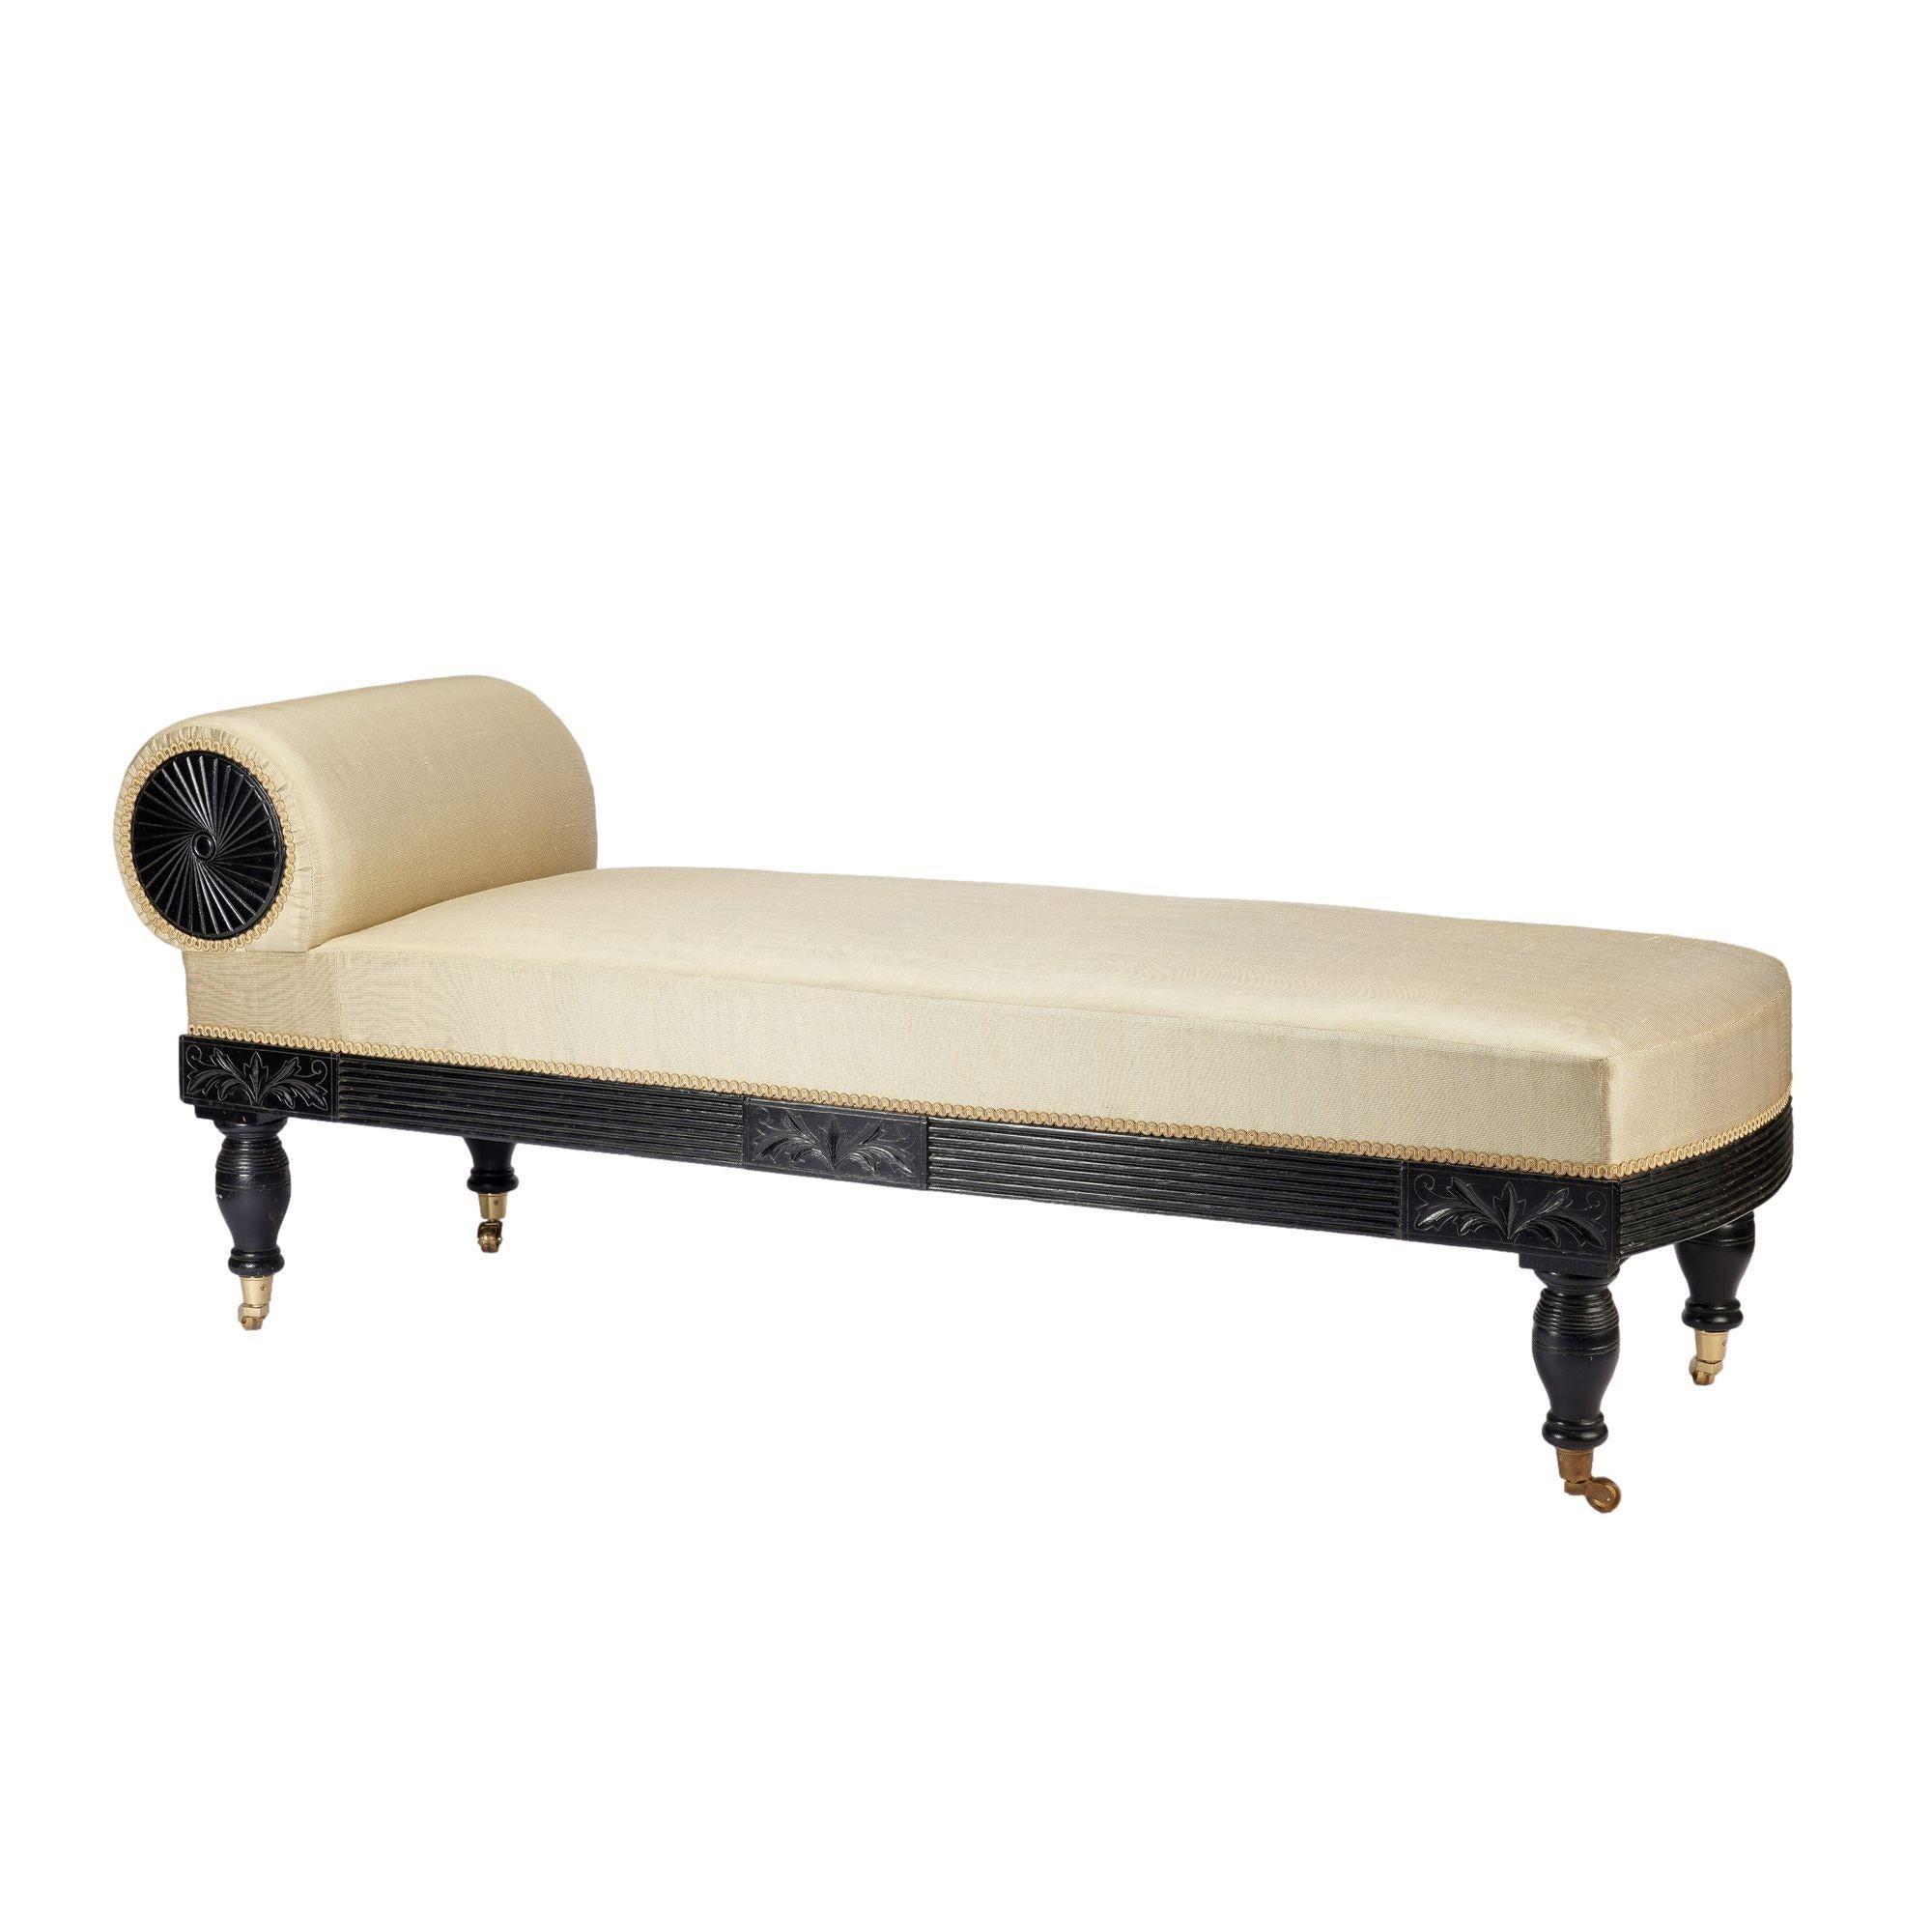 American Eastlake upholstered chaise in ebonized walnut with brass casters, 1888 For Sale 2